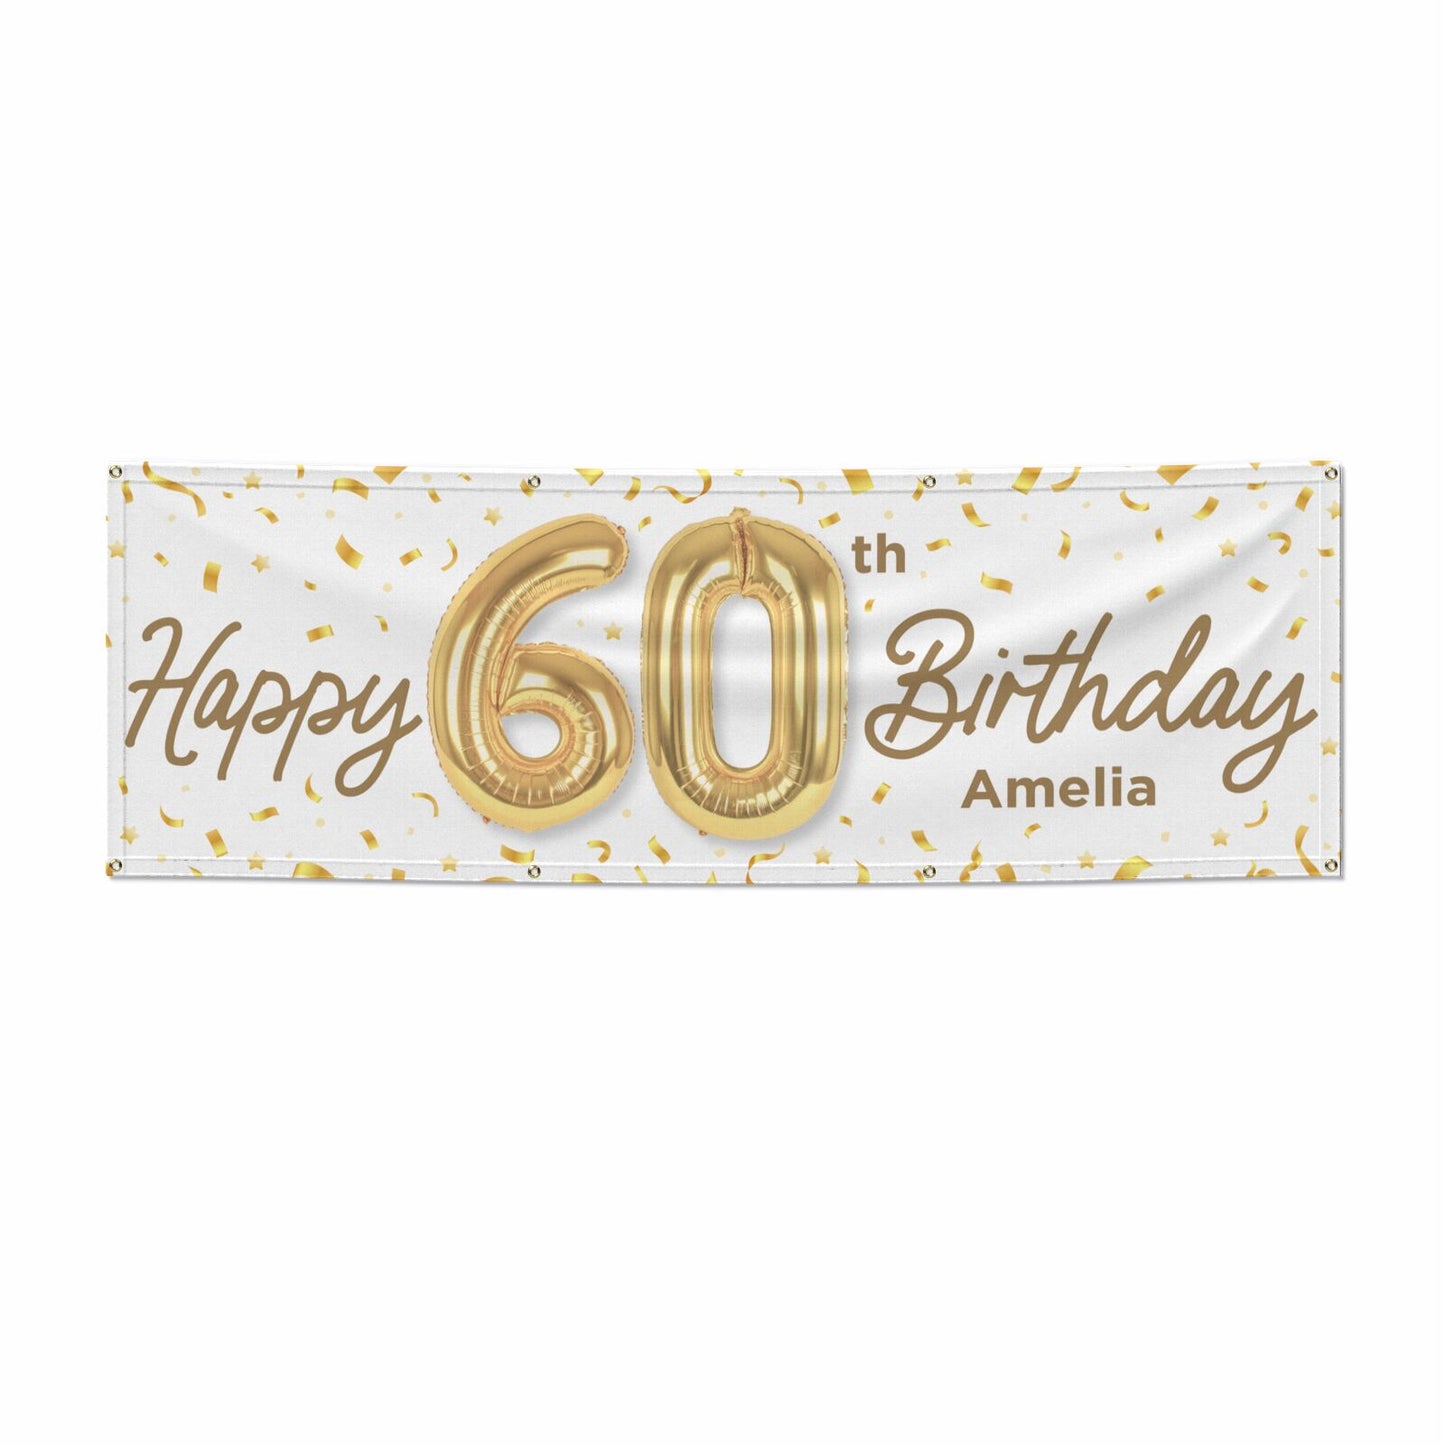 Personalised 60th Birthday 6x2 Vinly Banner with Grommets